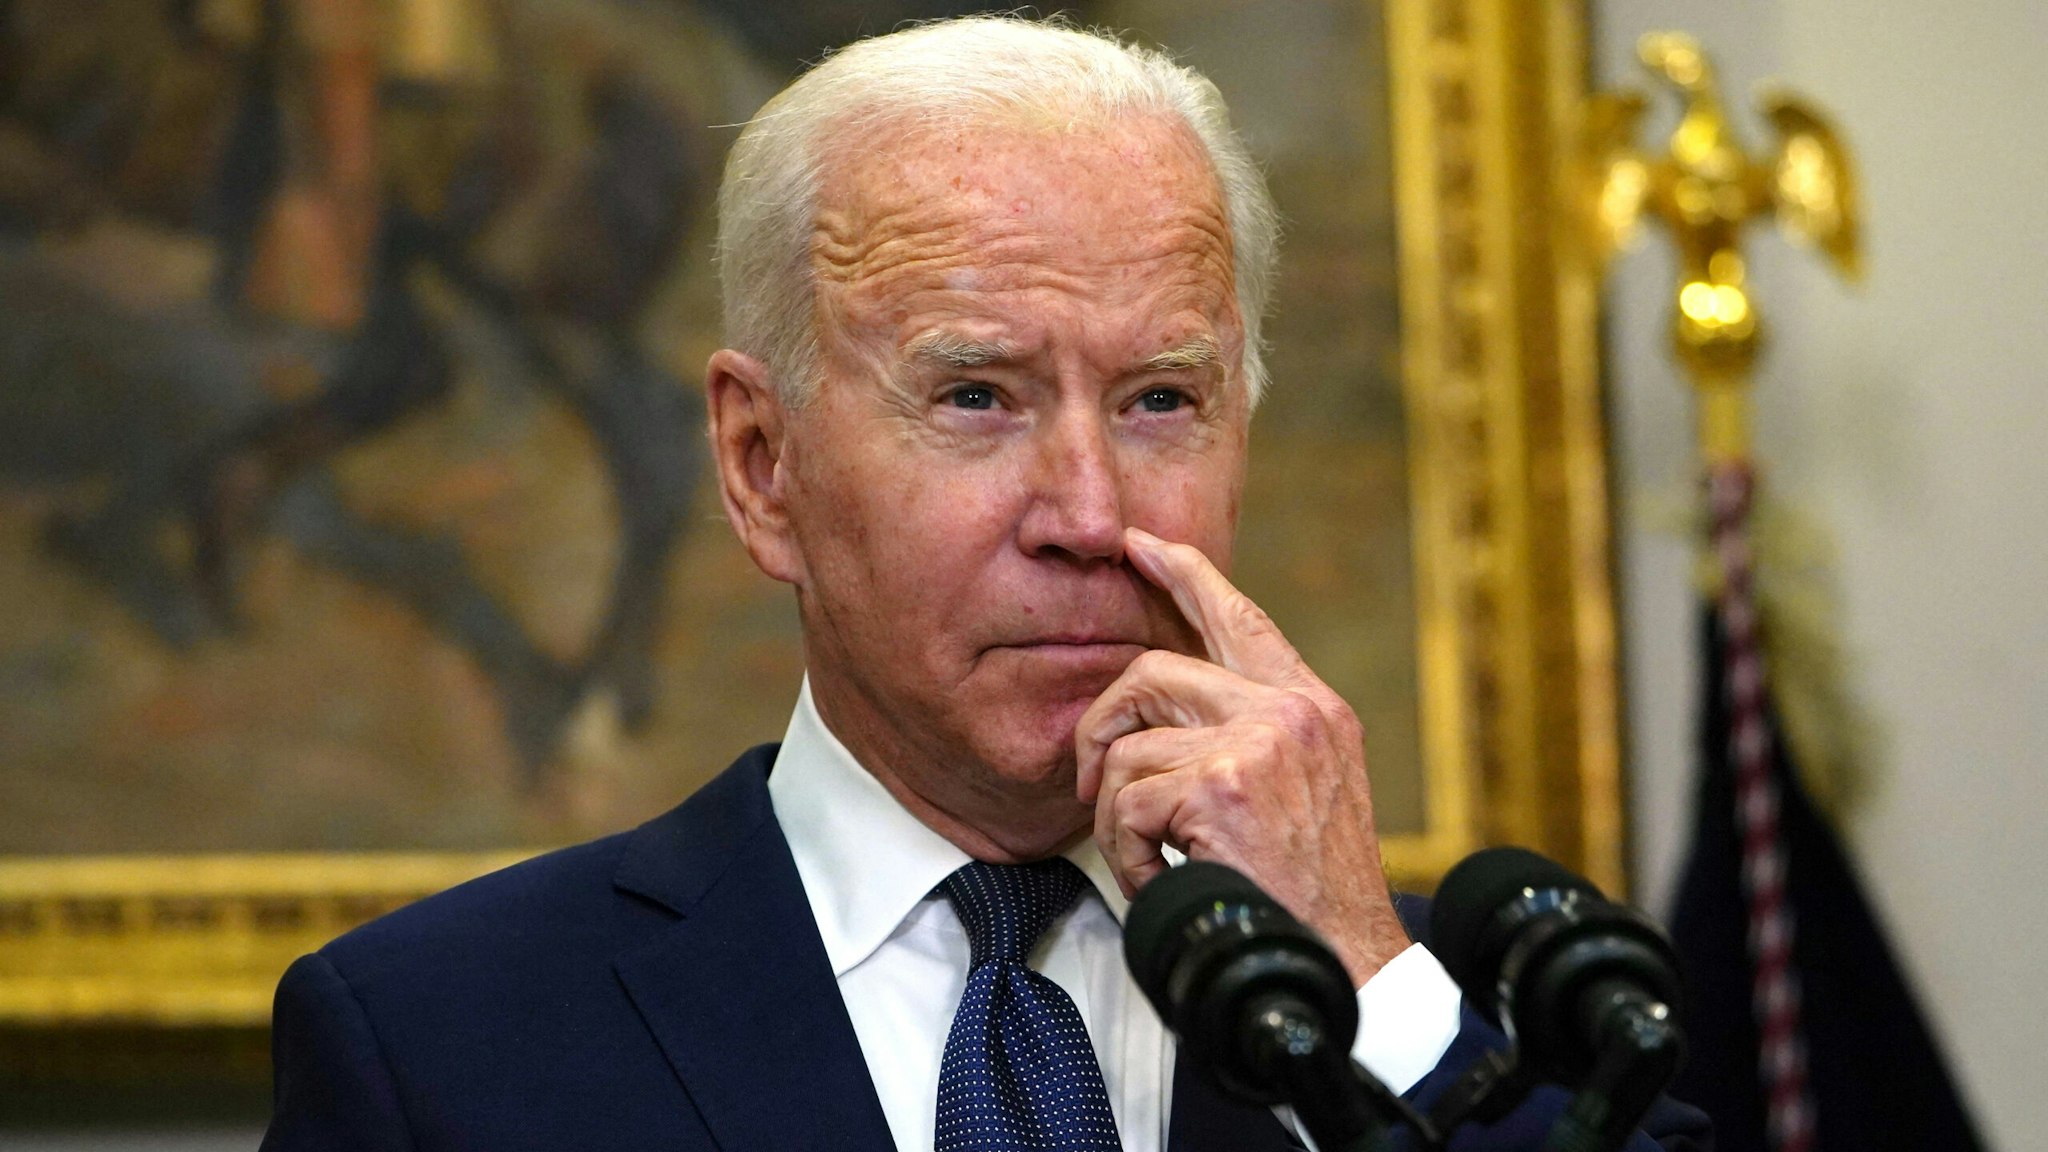 US President Joe Biden speaks during an update on the situation in Afghanistan and the effects of Tropical Storm Henri in the Roosevelt Room of the White House in Washington, DC on August 22, 2021.